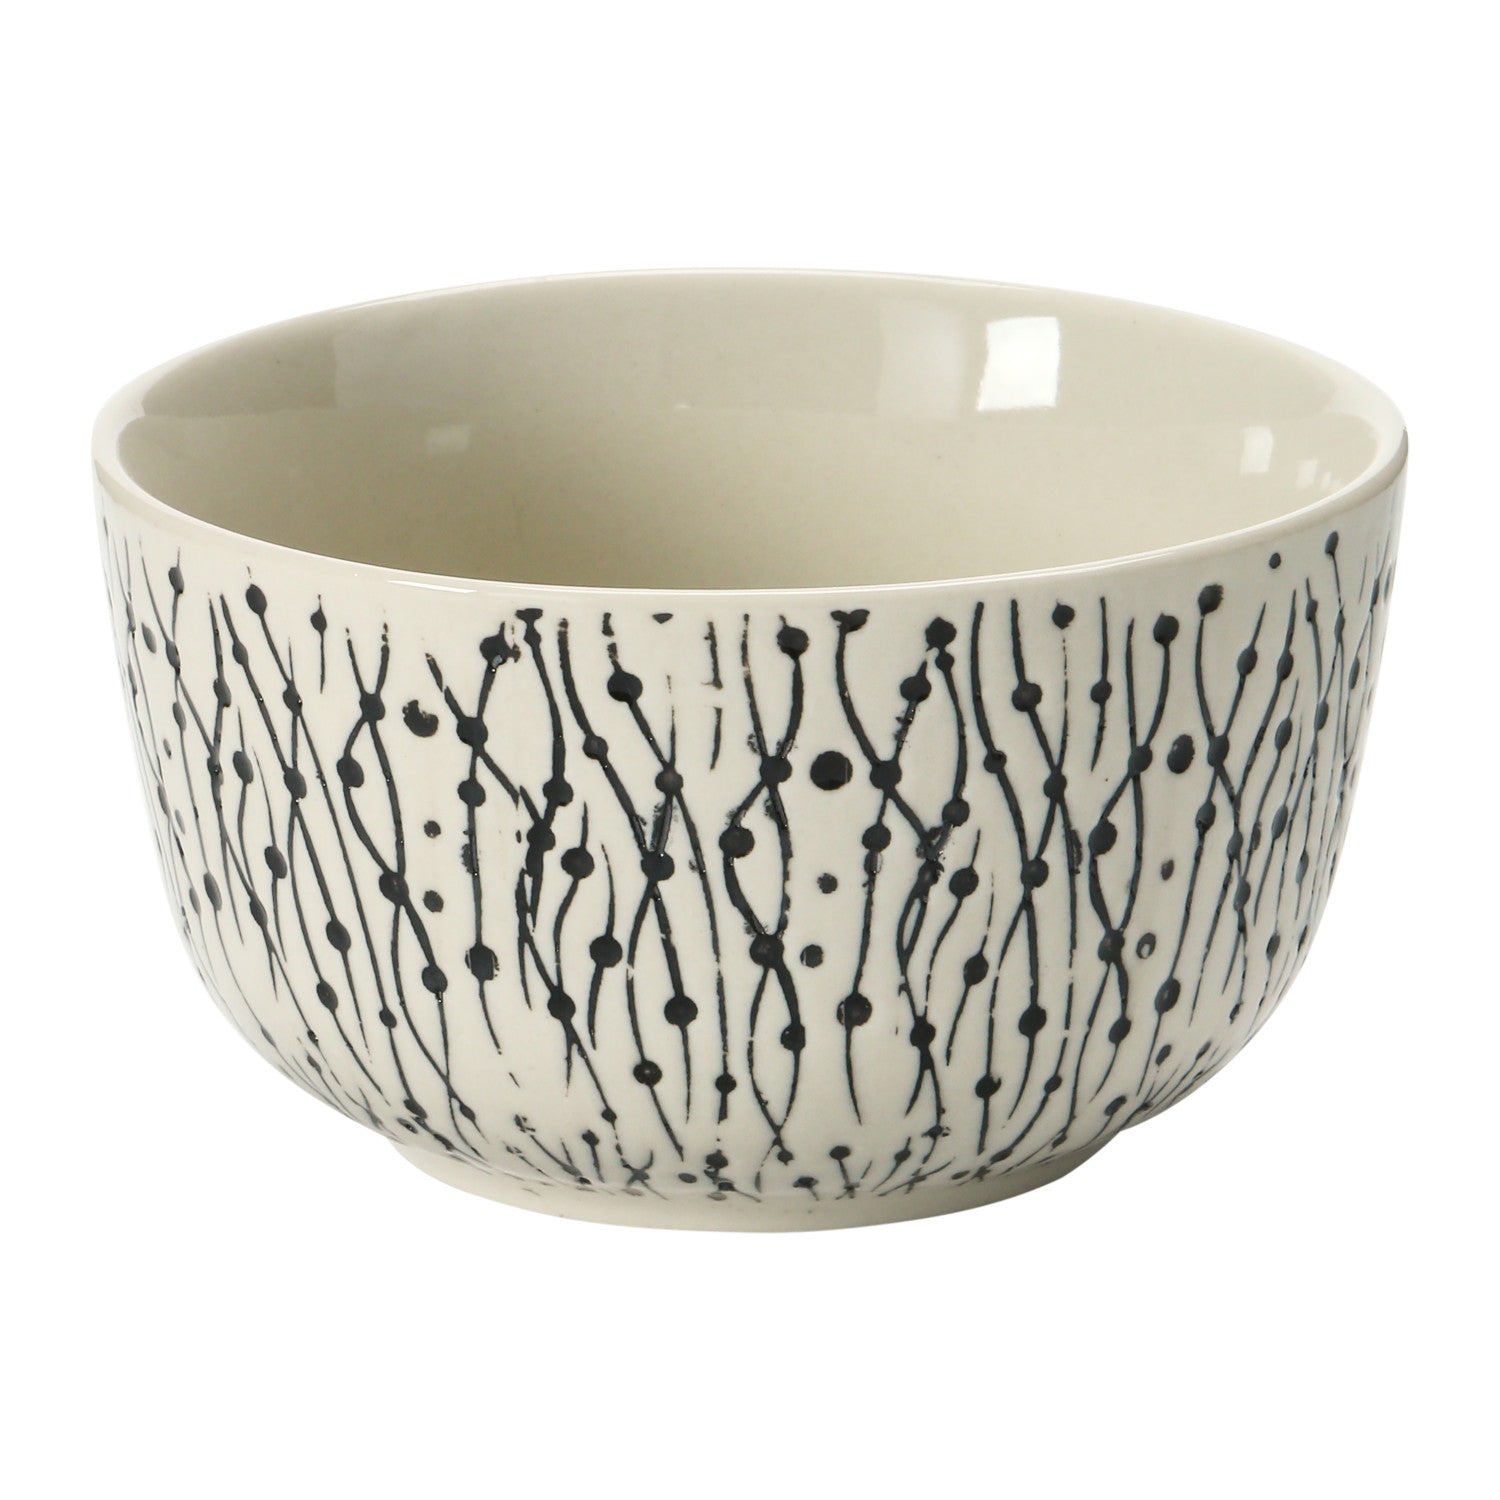 Stamped Stoneware Bowl w/ Embossed Pattern, Cream Color & Black